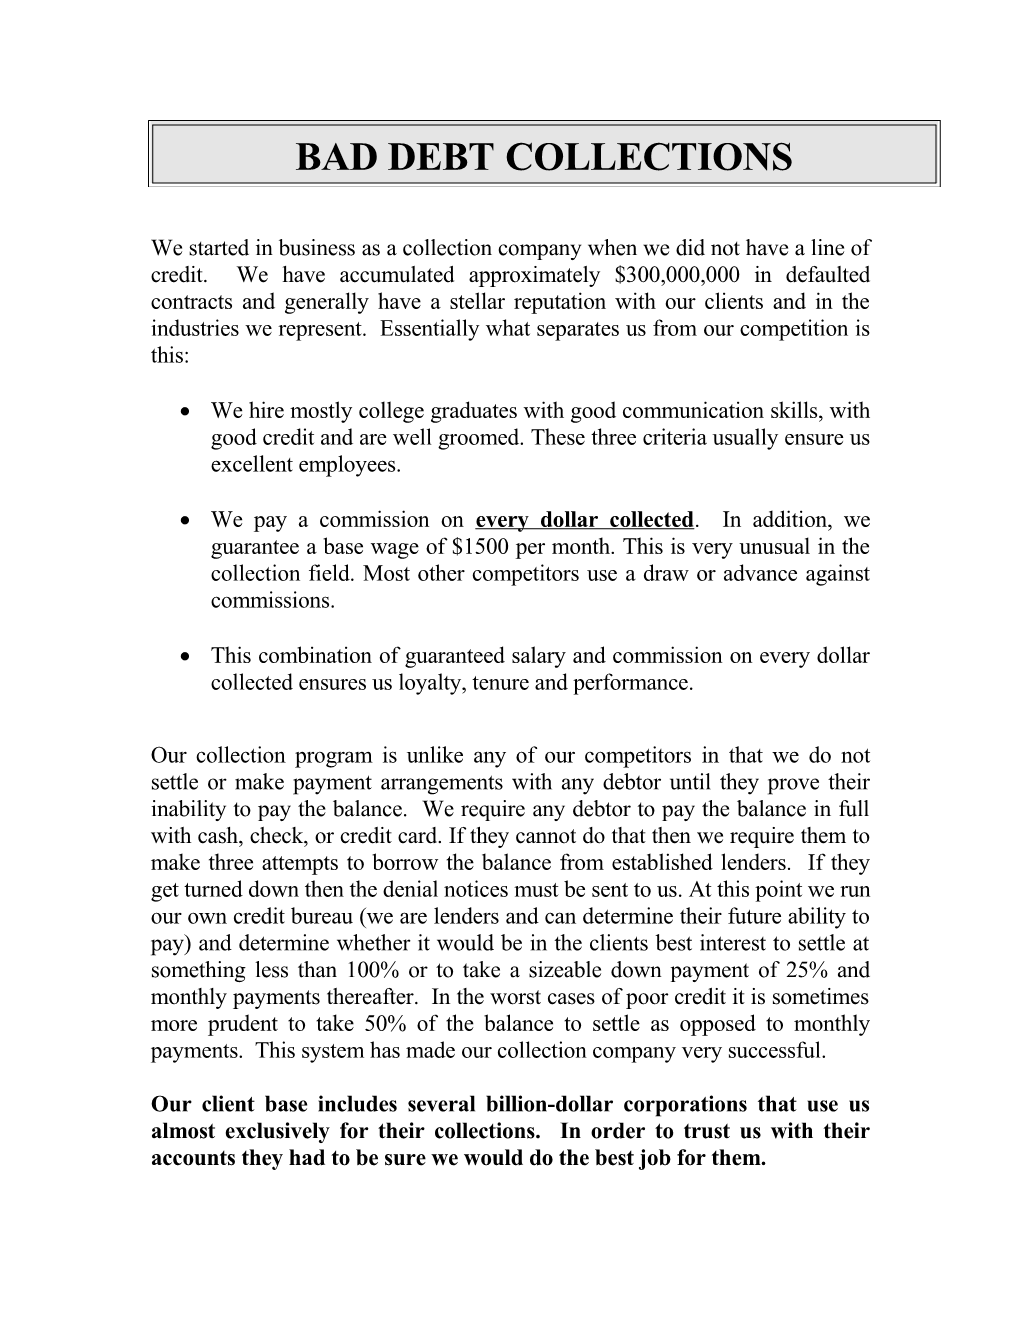 Bad Debt Collections